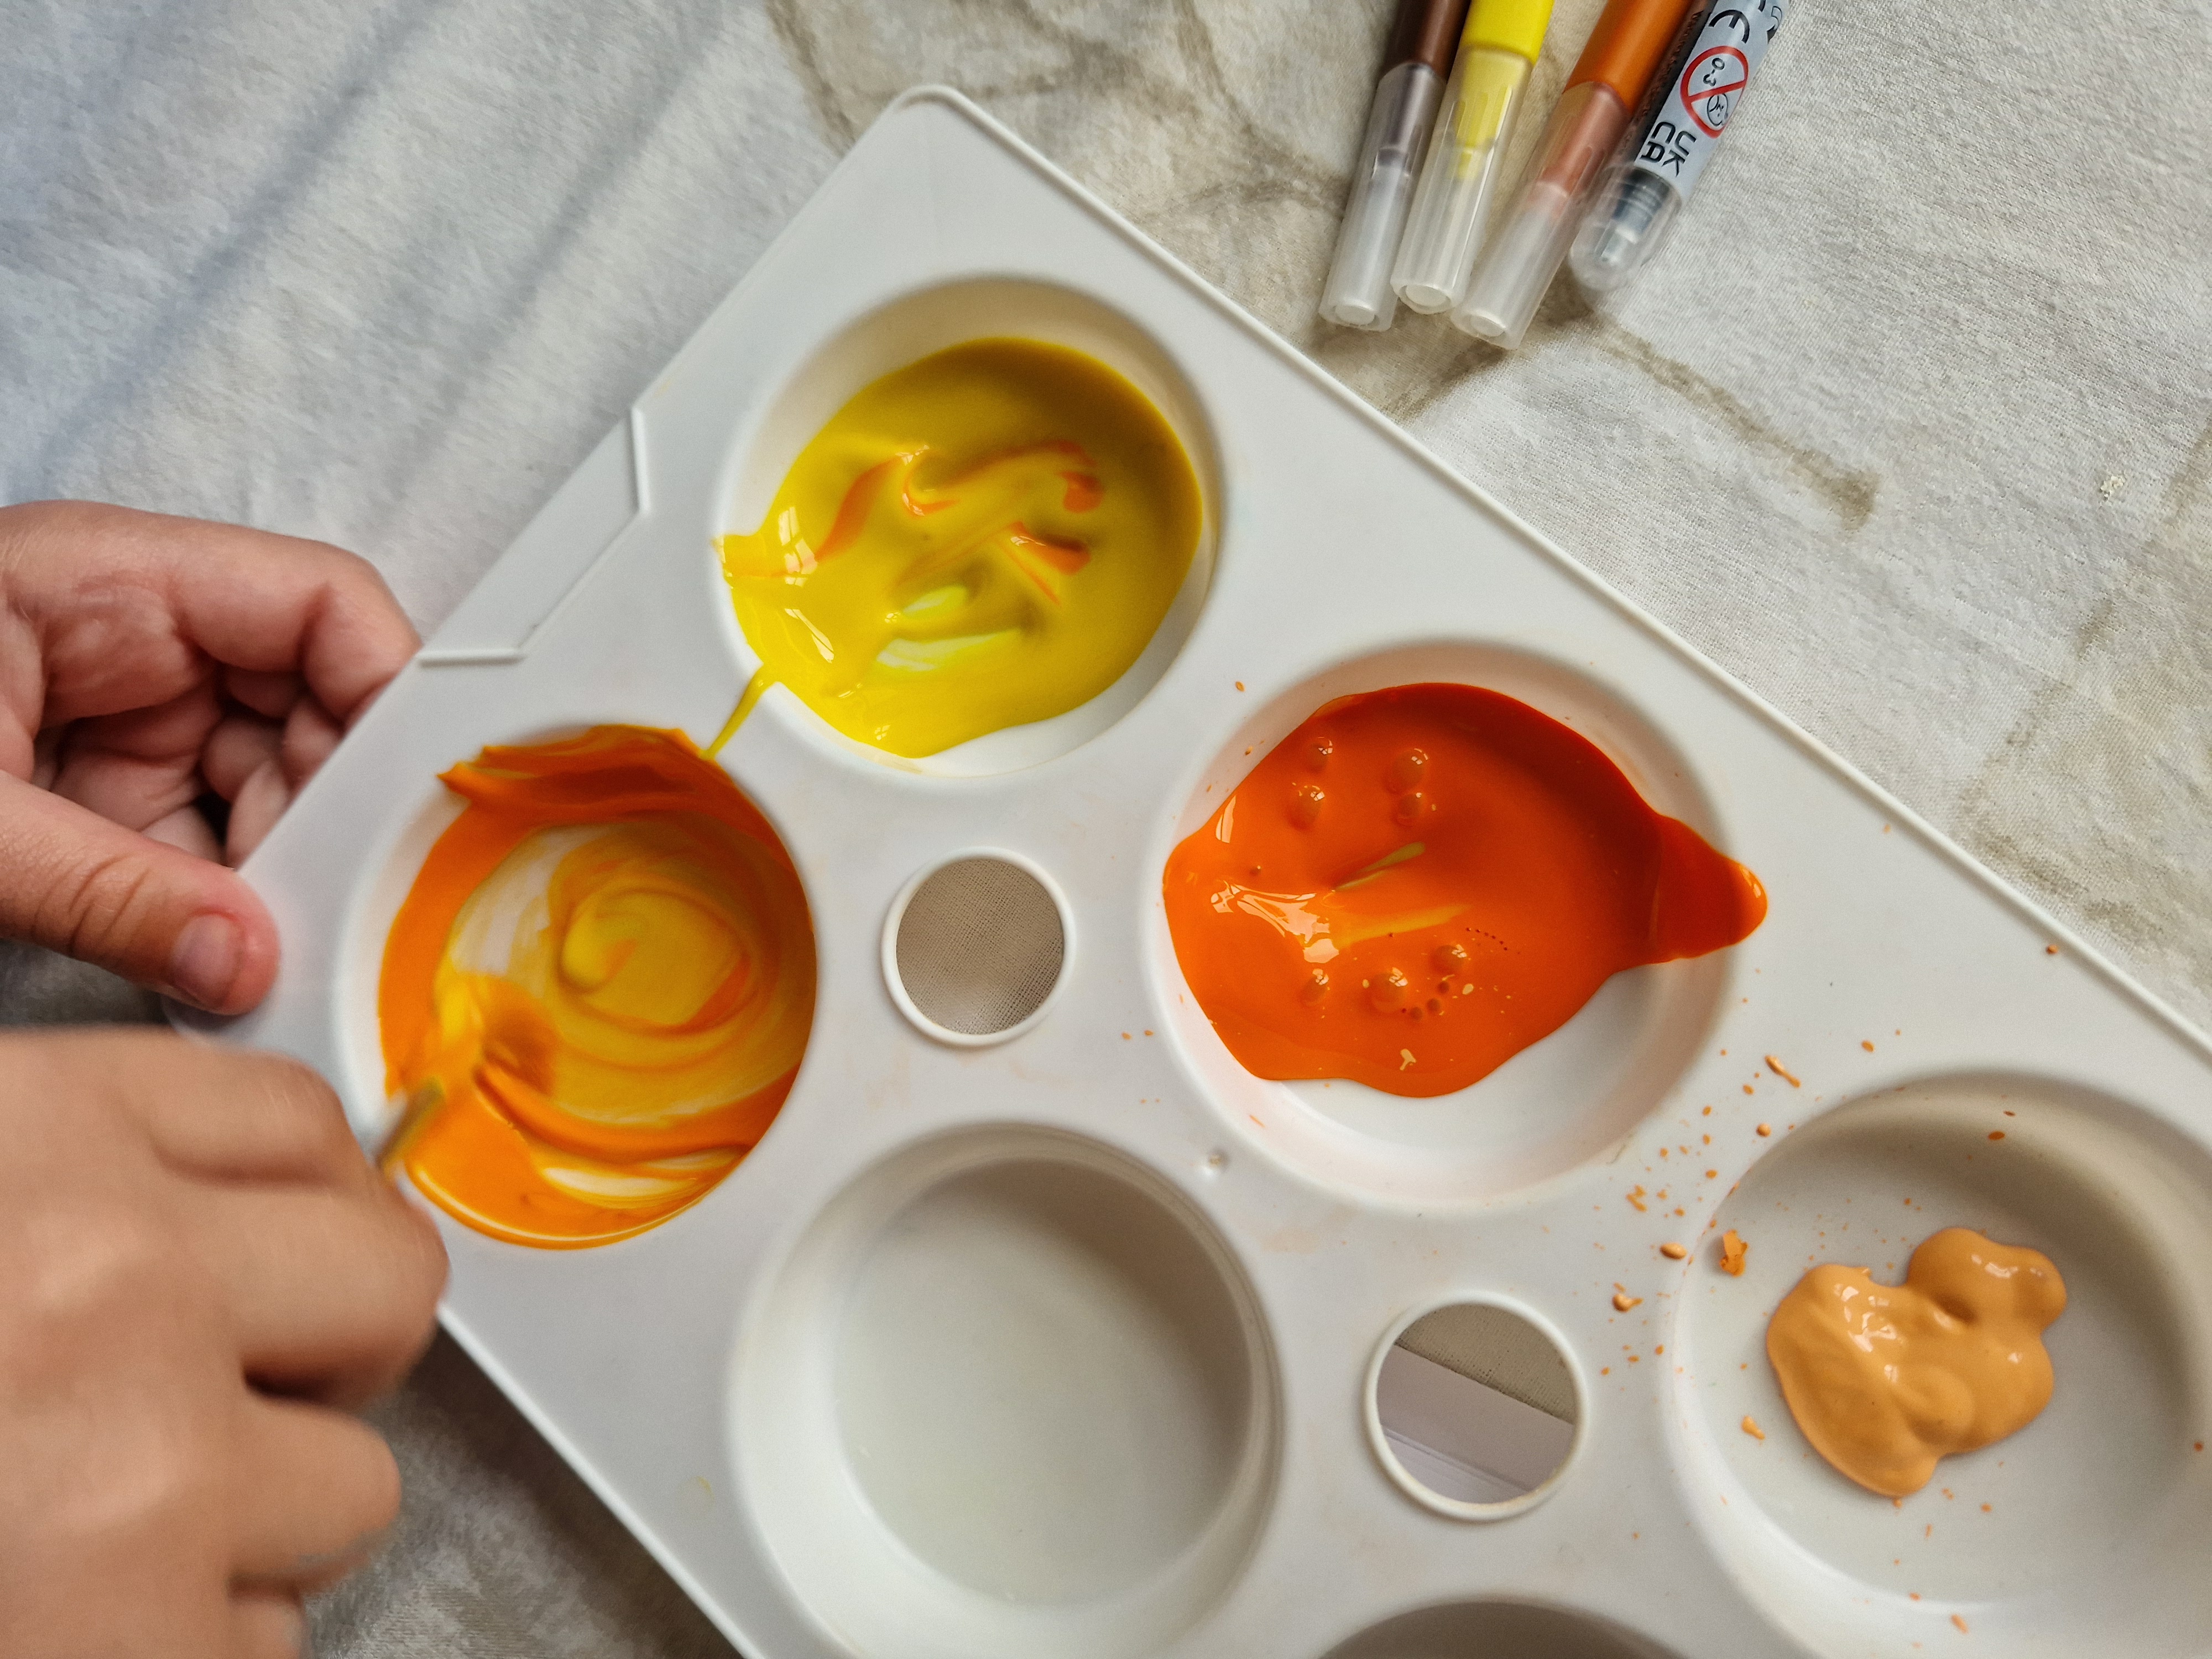 Mixing paints to create pale orange